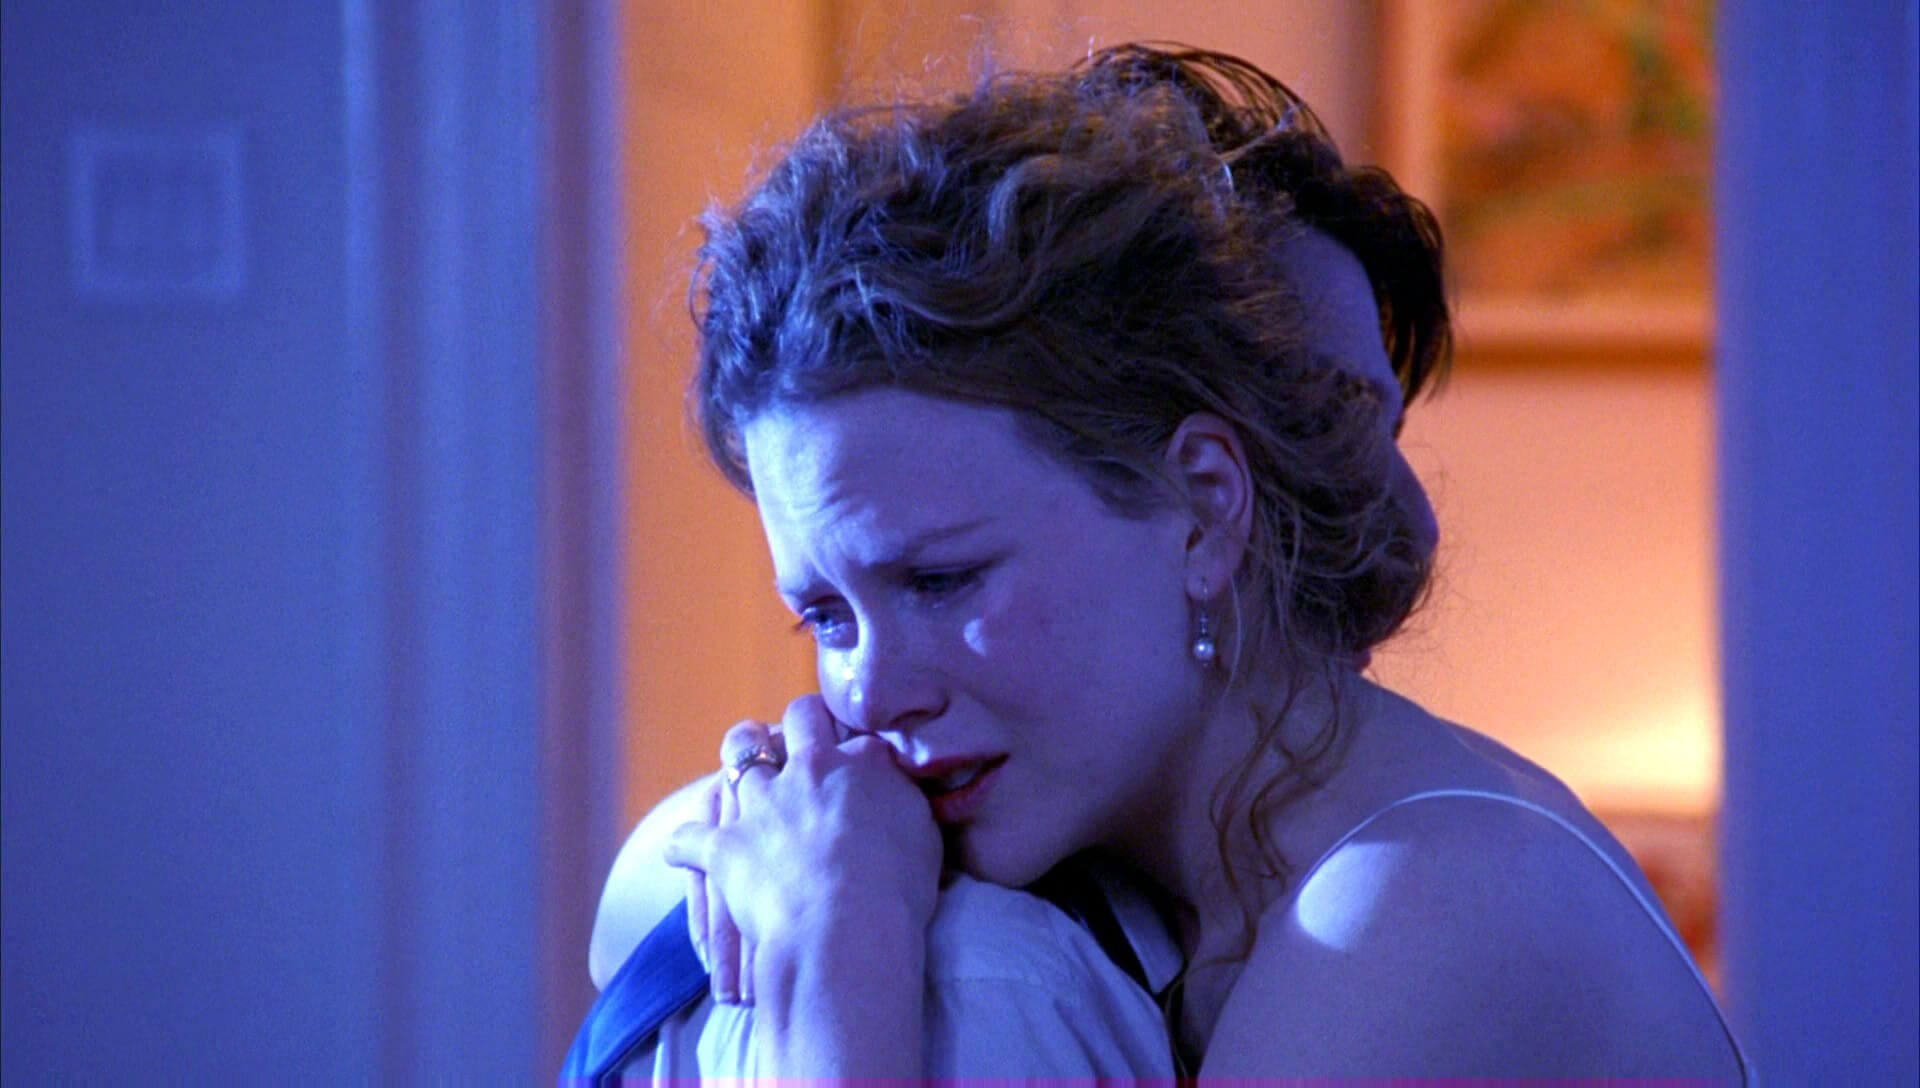 Complementary color scheme example in Eyes Wide Shut